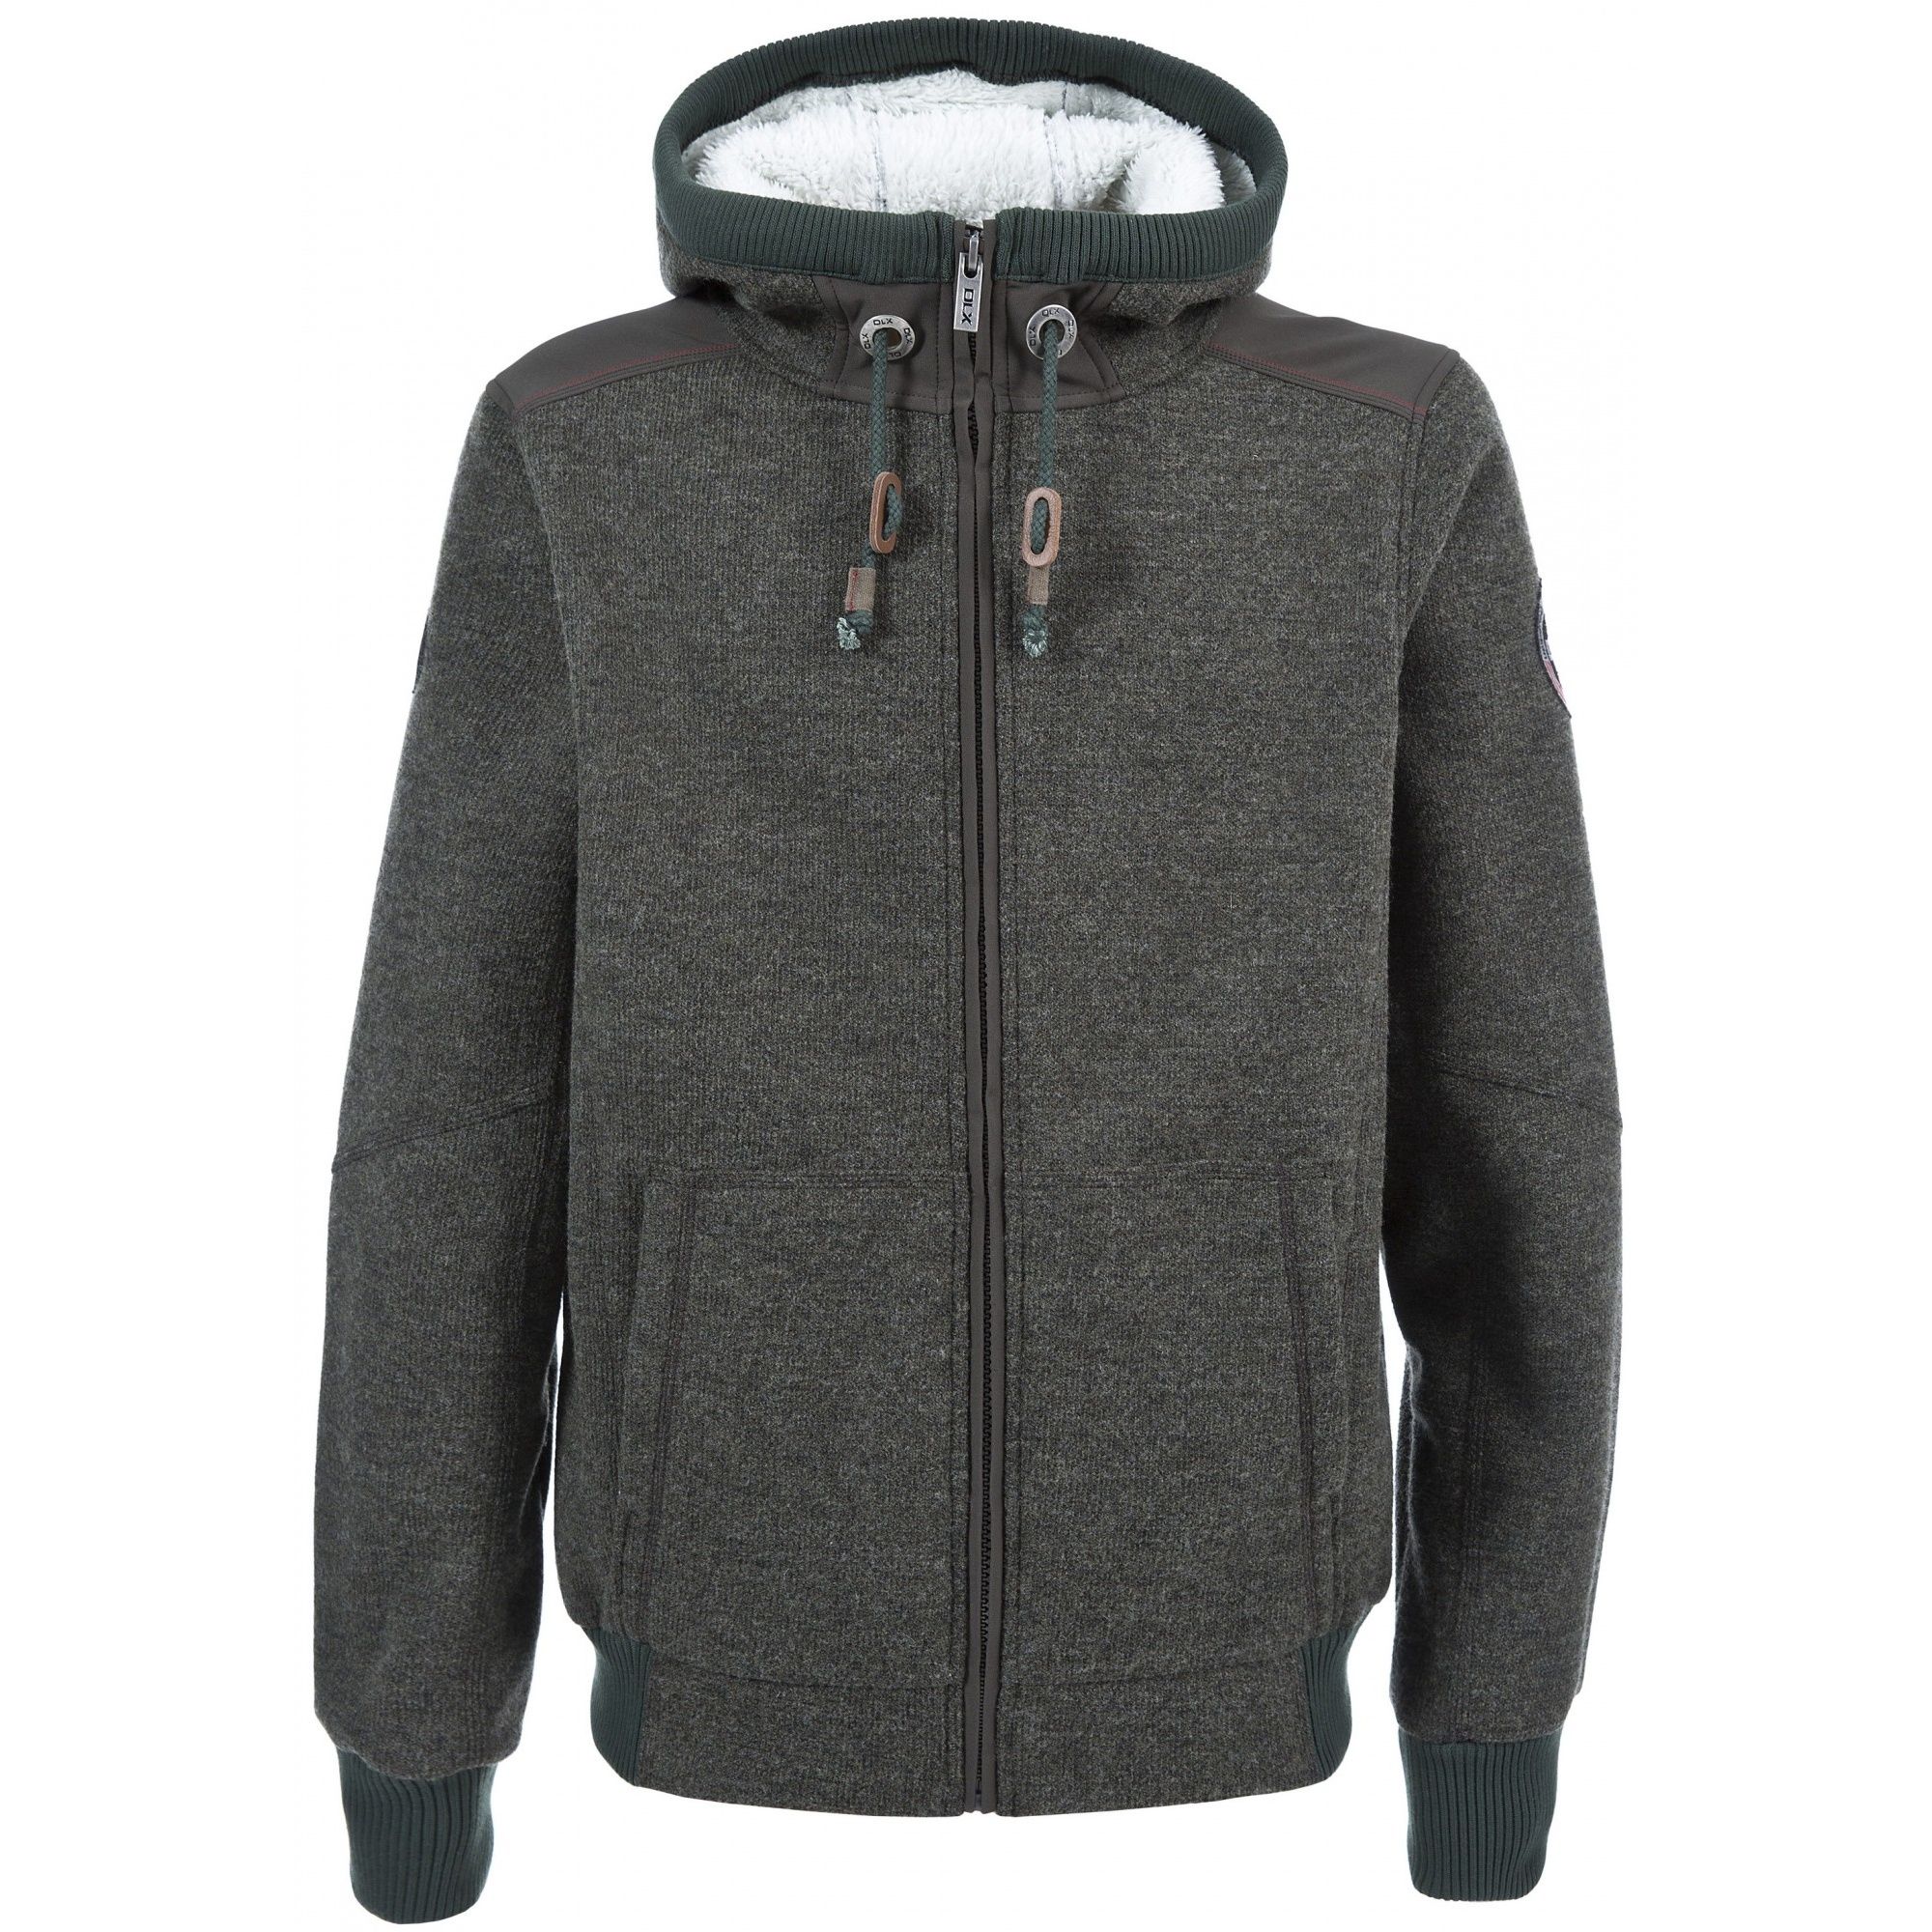 Mens knitted fleece jacket. Bonded fleece lining. Grown on hood. Contrast panel details. 2 pockets. Knitted collar and cuffs. Main: 76% Polyester, 17% wool, 7% nylon, Trim: 94% Polyester, 6% spandex. Machine washable.